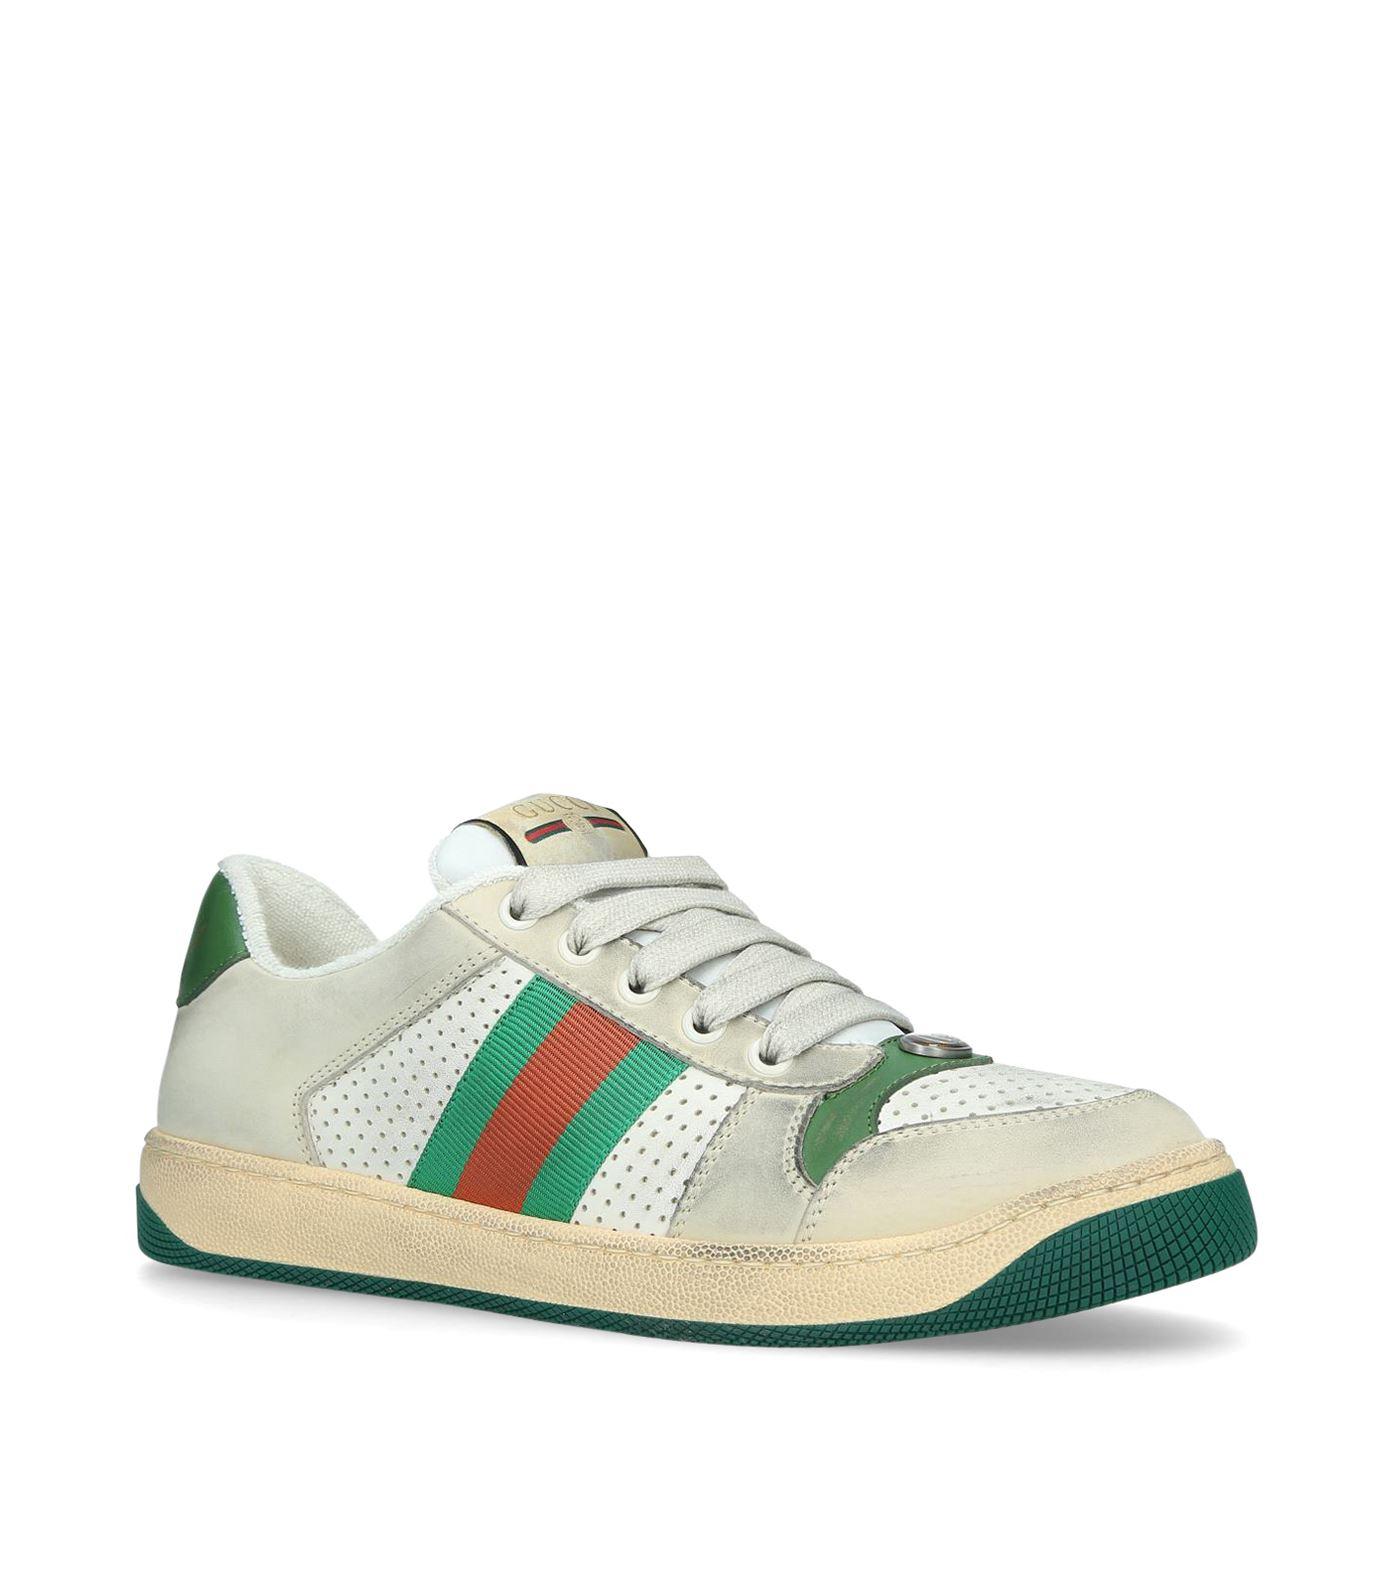 Gucci Leather Screener Sneakers in White - Save 14% - Lyst